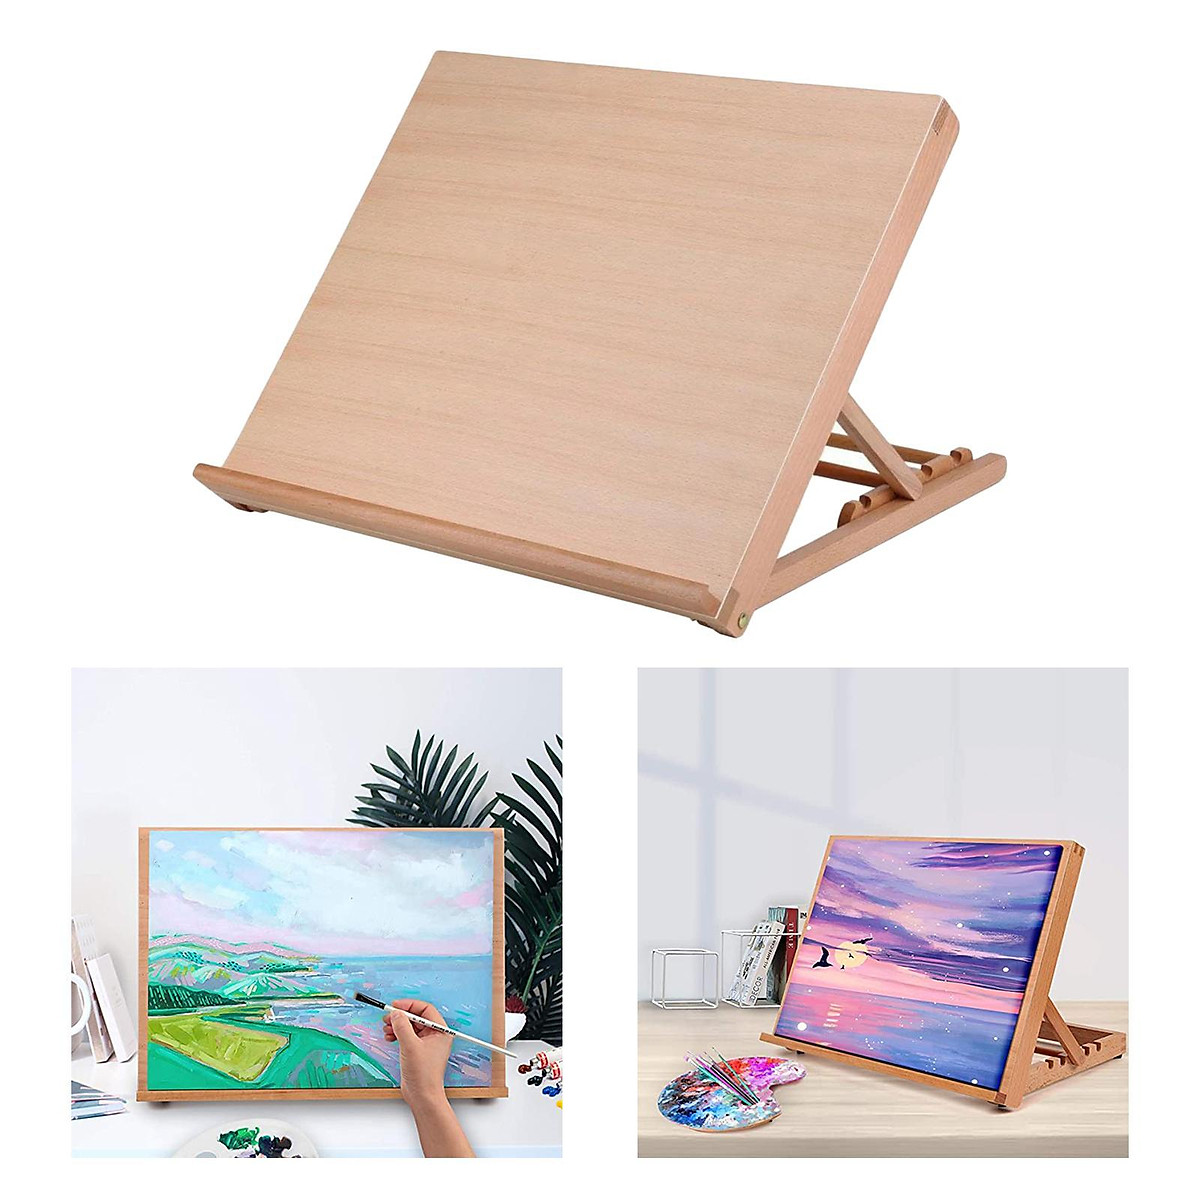 Adjustable Sketch Easel Wooden Desktop Easel Artist Tabletop Drawing Board  Stand Easel For Watercolor Oil Painting